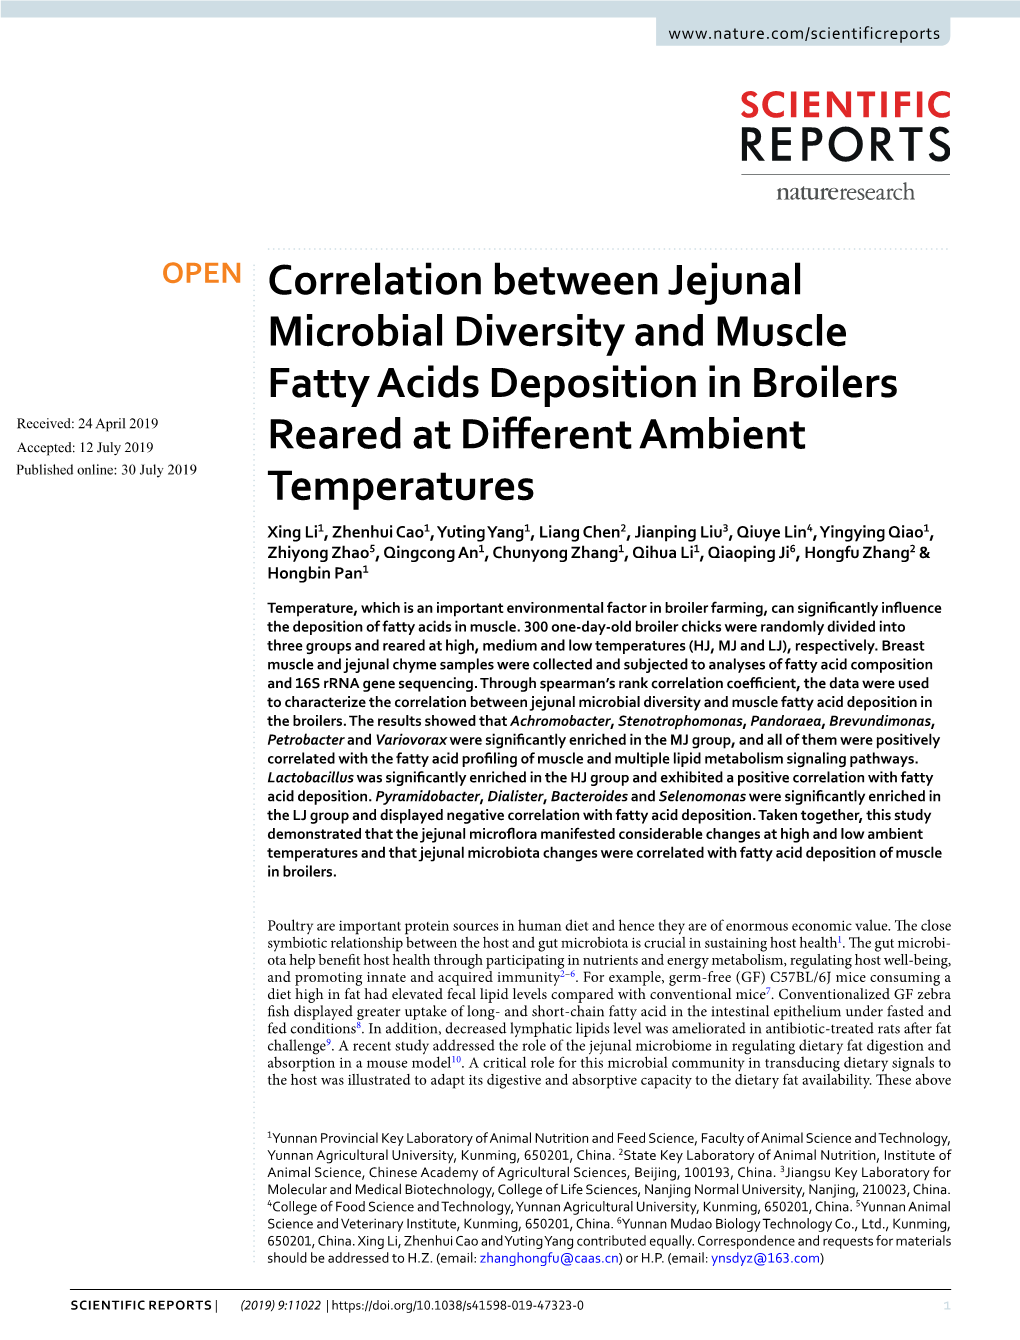 Correlation Between Jejunal Microbial Diversity and Muscle Fatty Acids